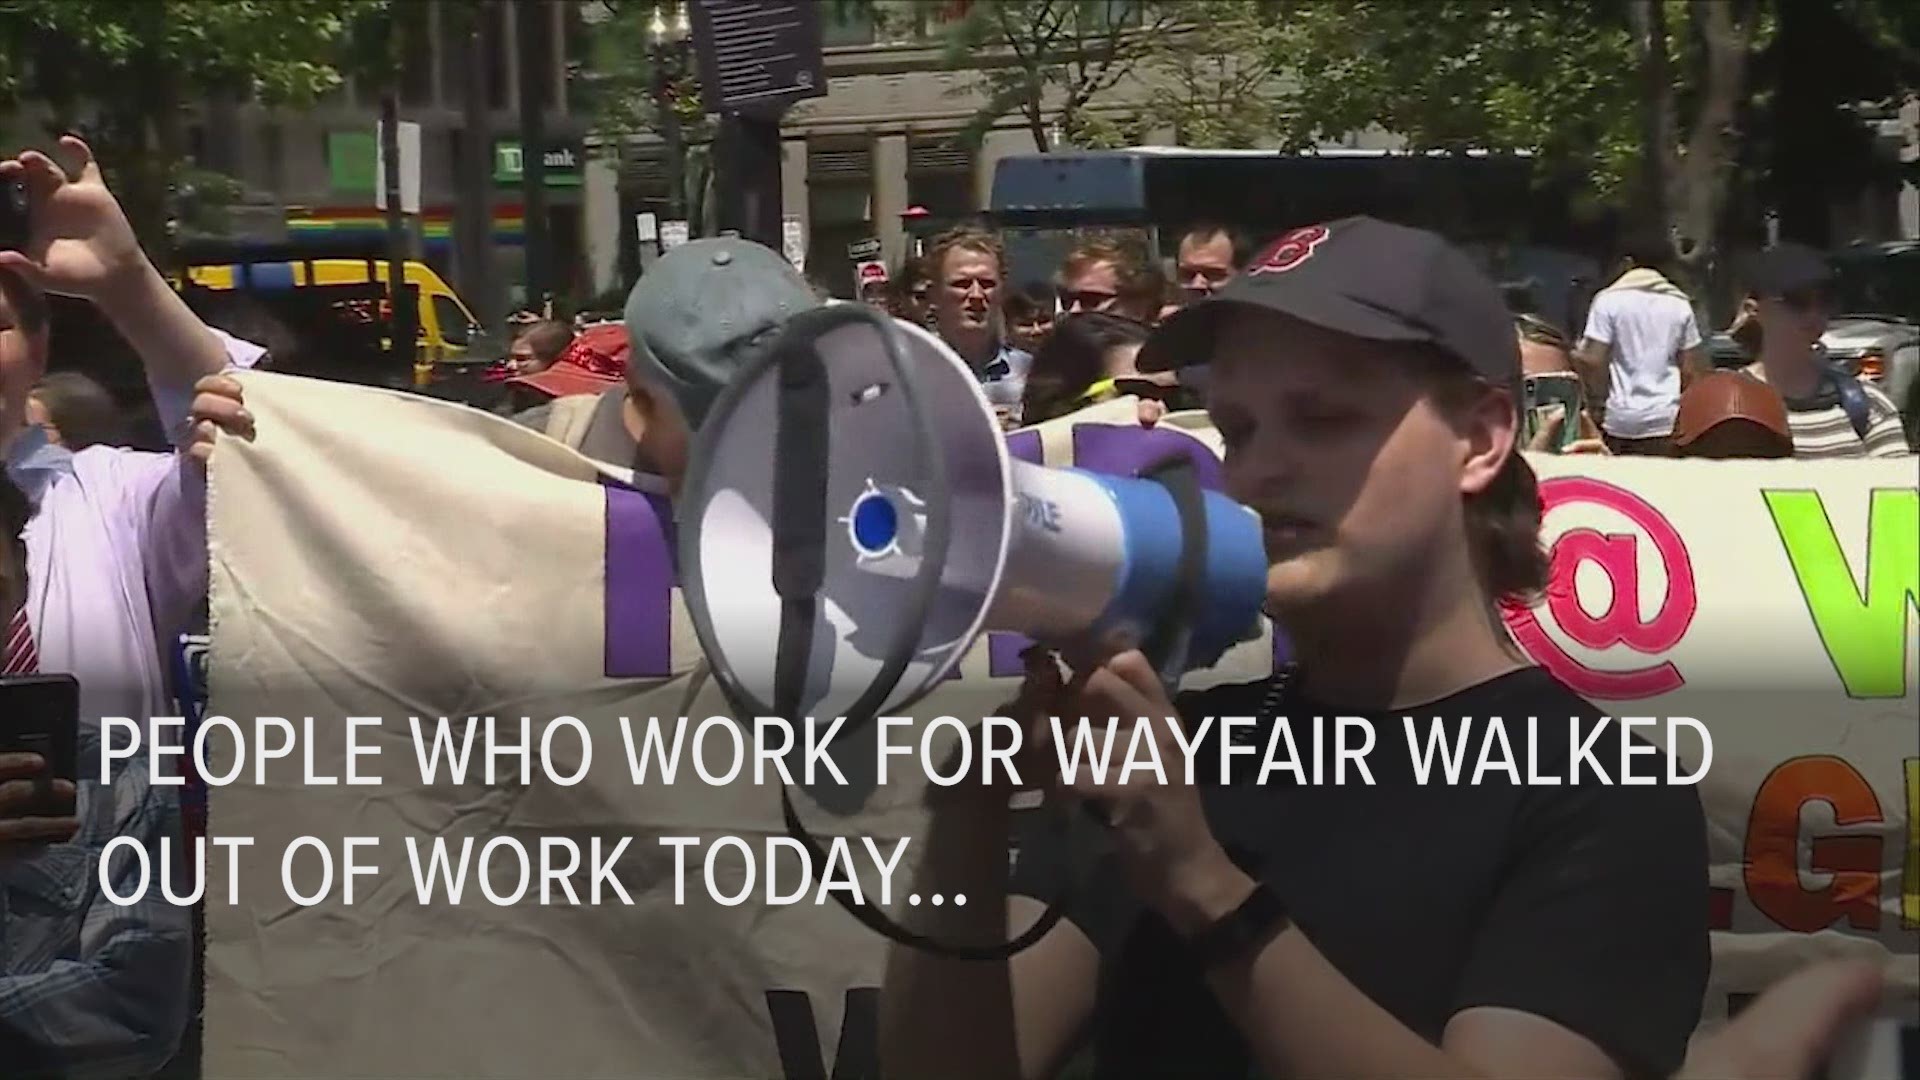 Wayfair employees walked out today in protest of the company selling to a contractor that runs a migrant children detention center.